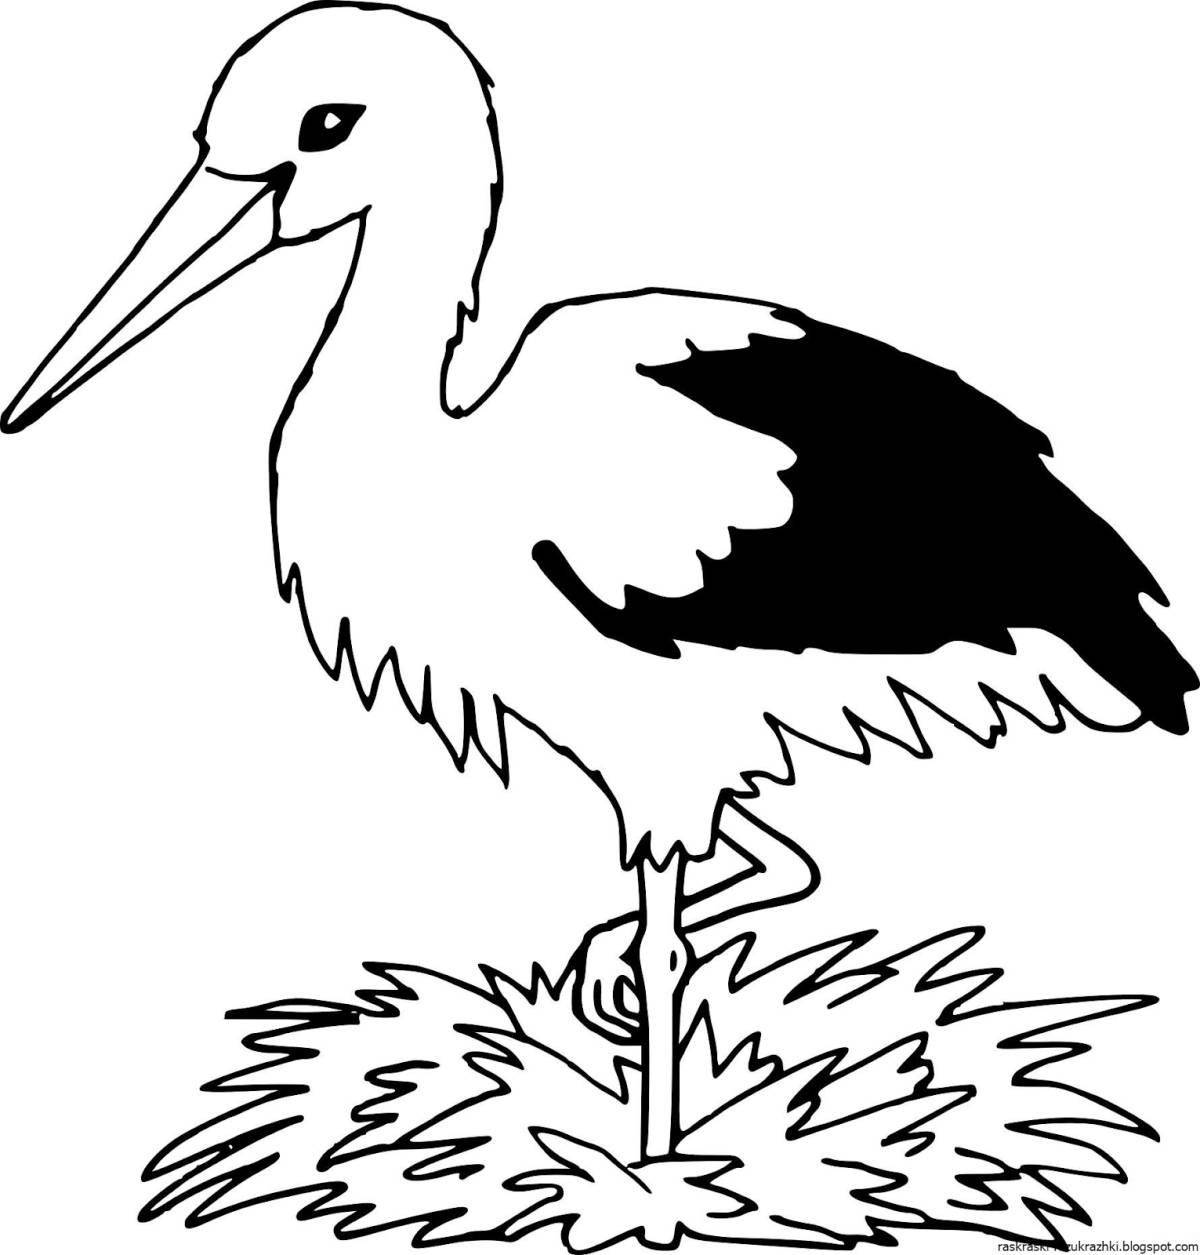 Extraordinary black stork coloring book for kids